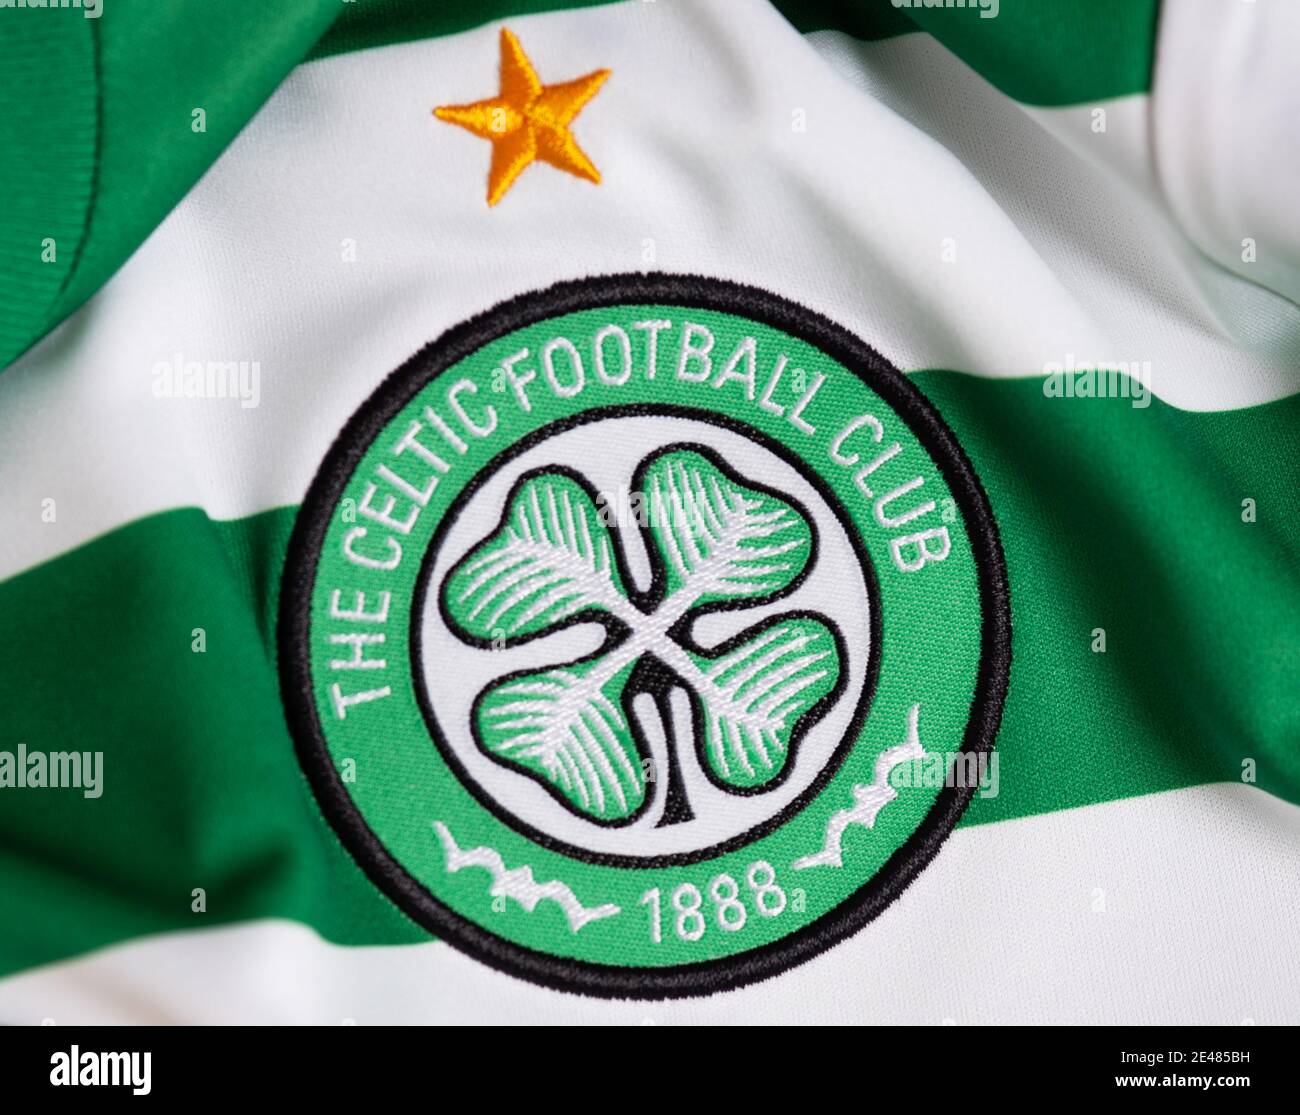 What happened with that white badge Celtic kit? Was it fan made